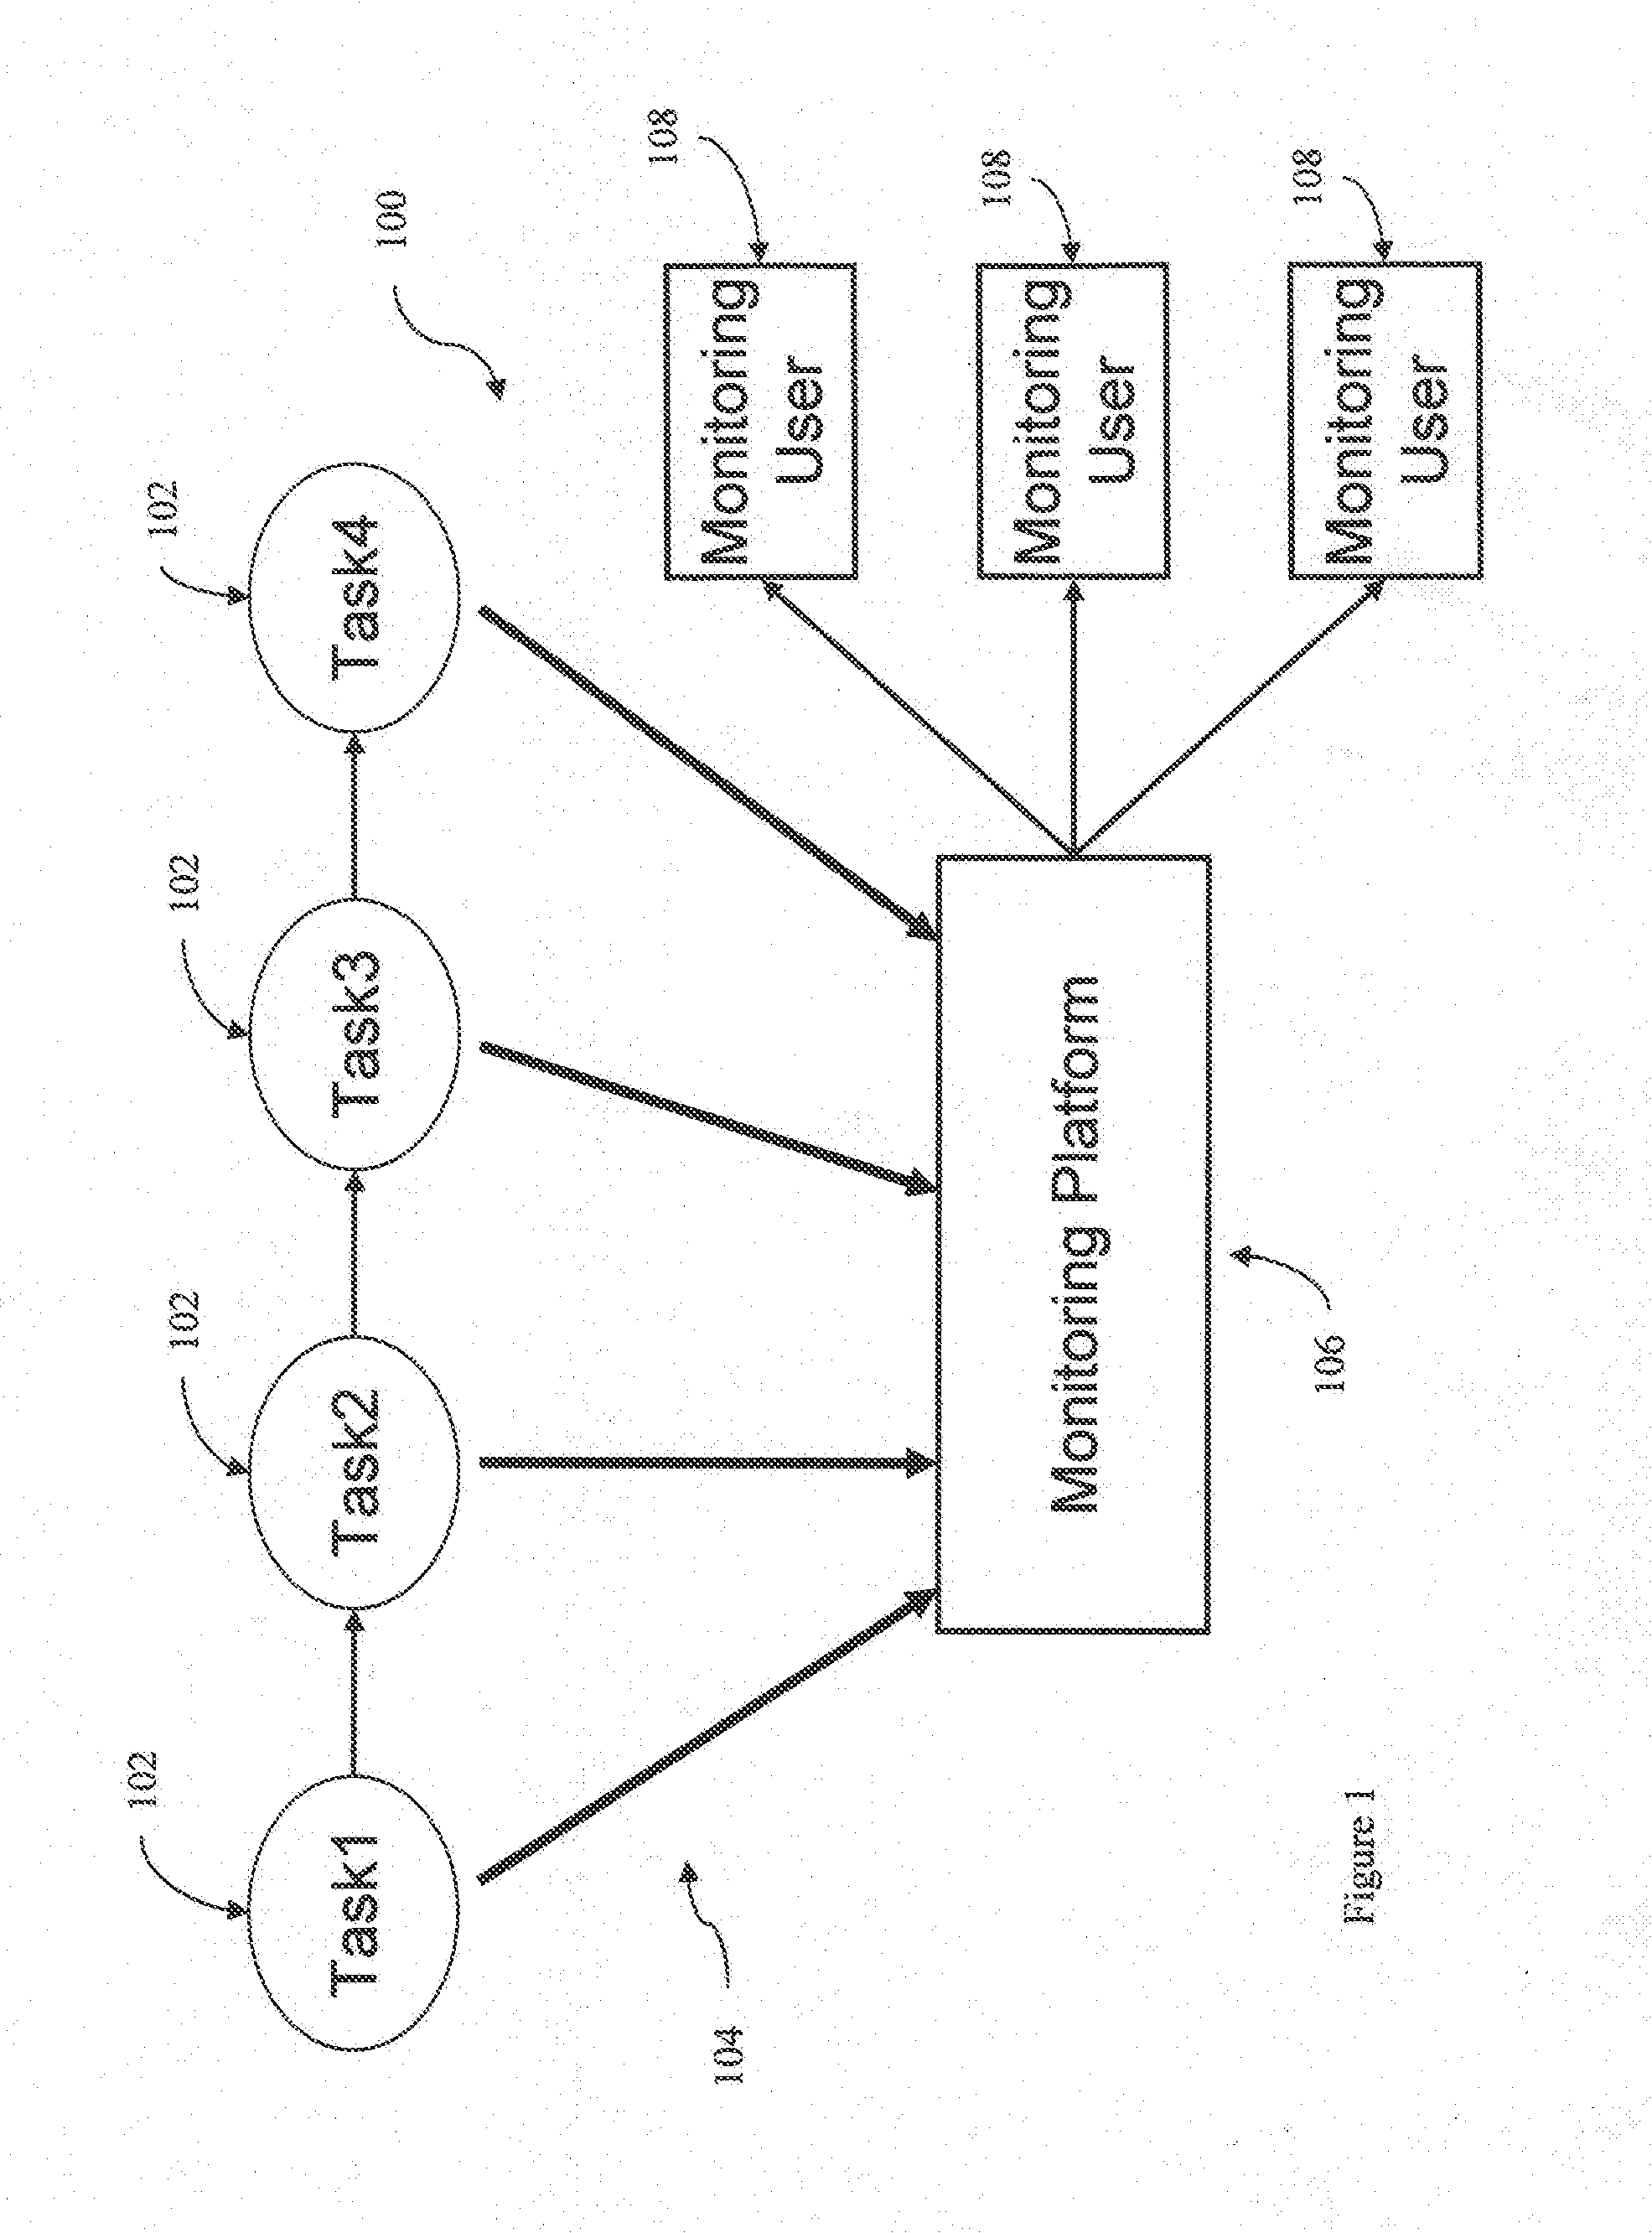 System and method for monitoring business performance using monitoring artifacts